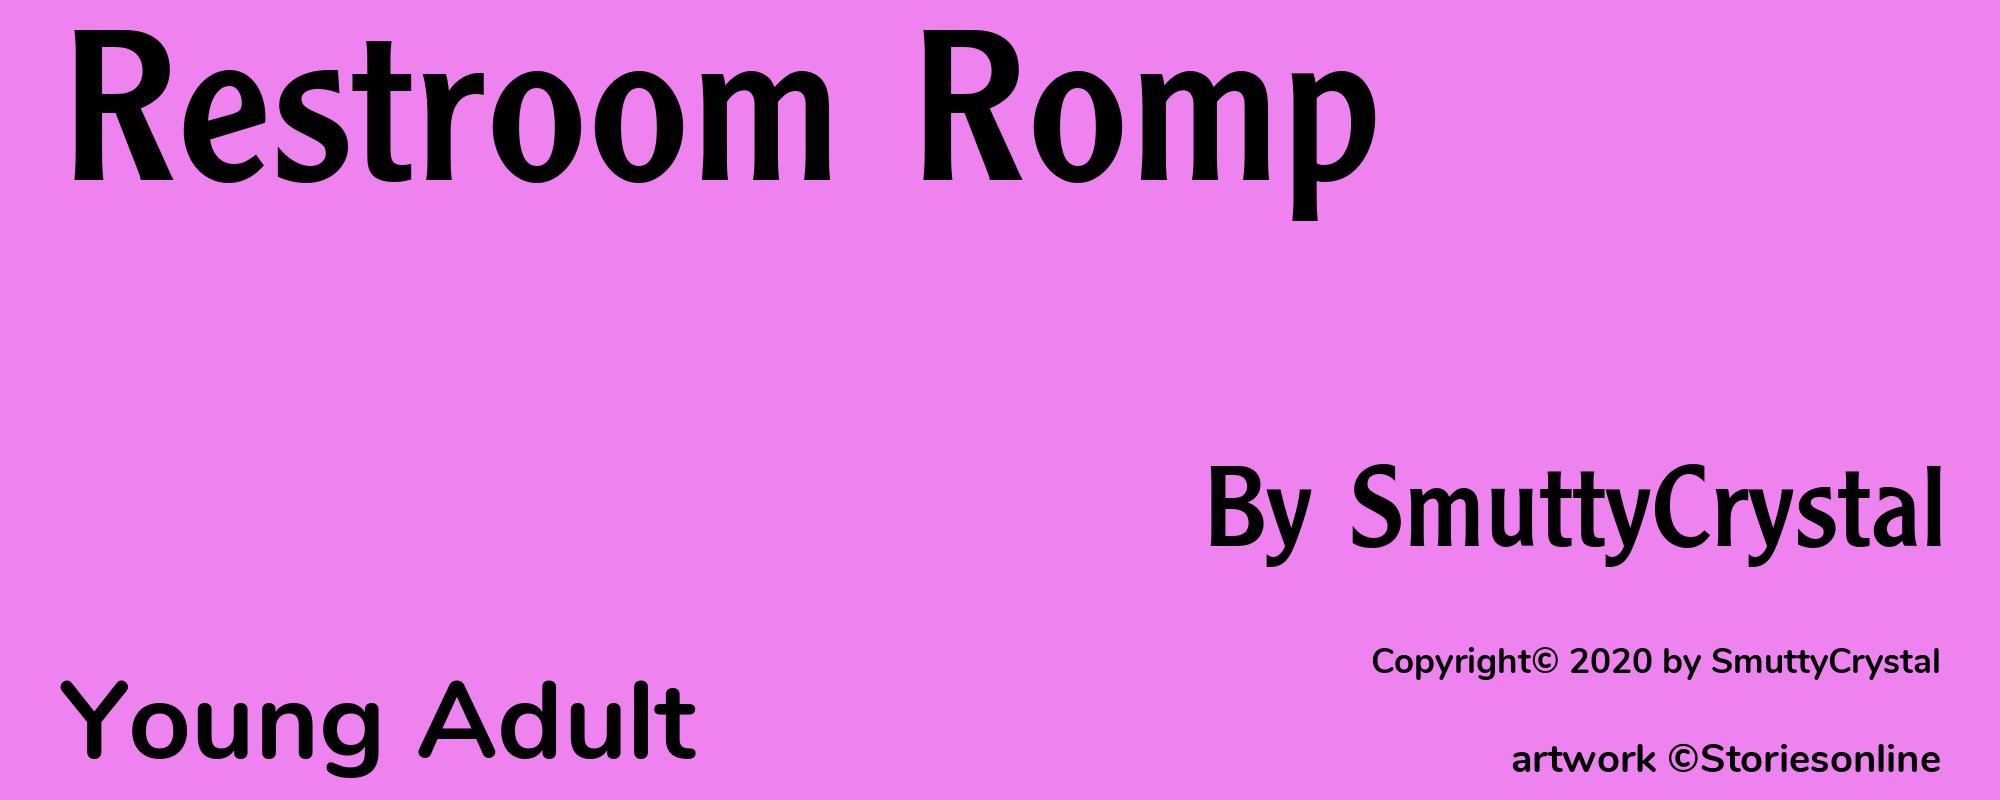 Restroom Romp - Cover